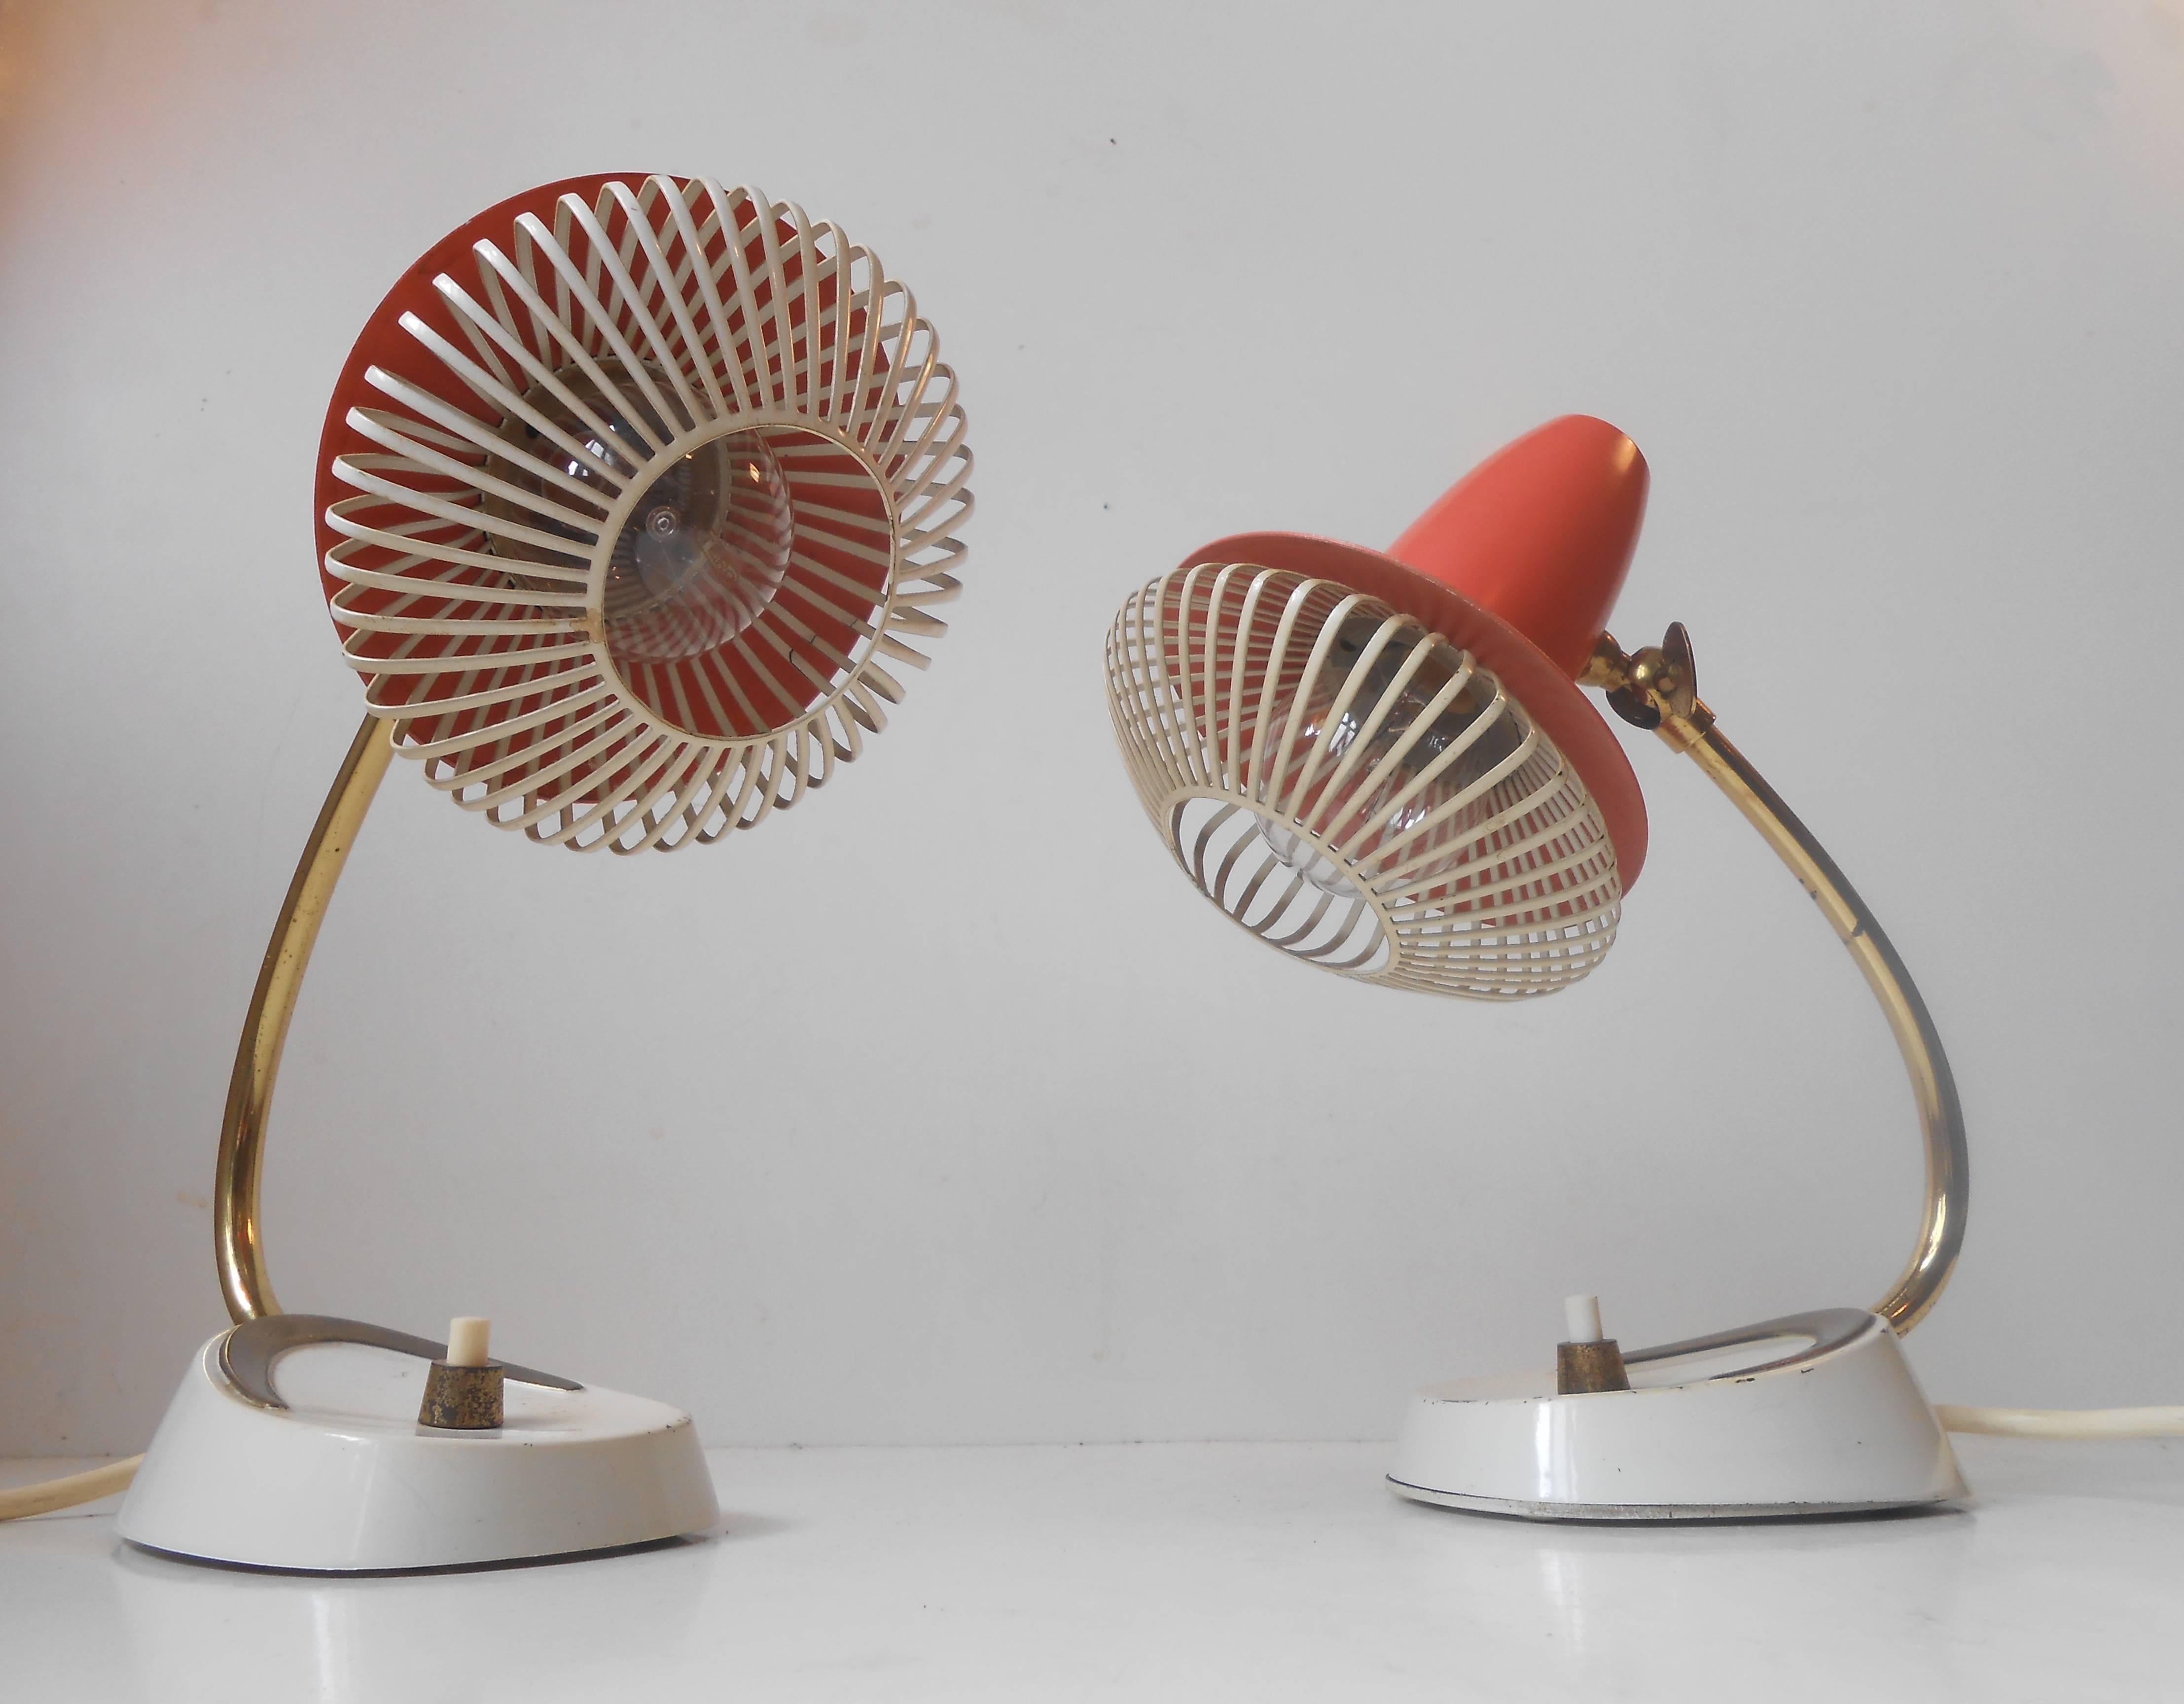 A pair of night table lamps with clay-red shading, brass Boomerang base details and light-softening wire mesh shade baskets. Manufactured in Italy during the 1950s in a style reminiscent of Stilnovo. Measurements: H 9.5 inches (23.5 cm), D: (shades)